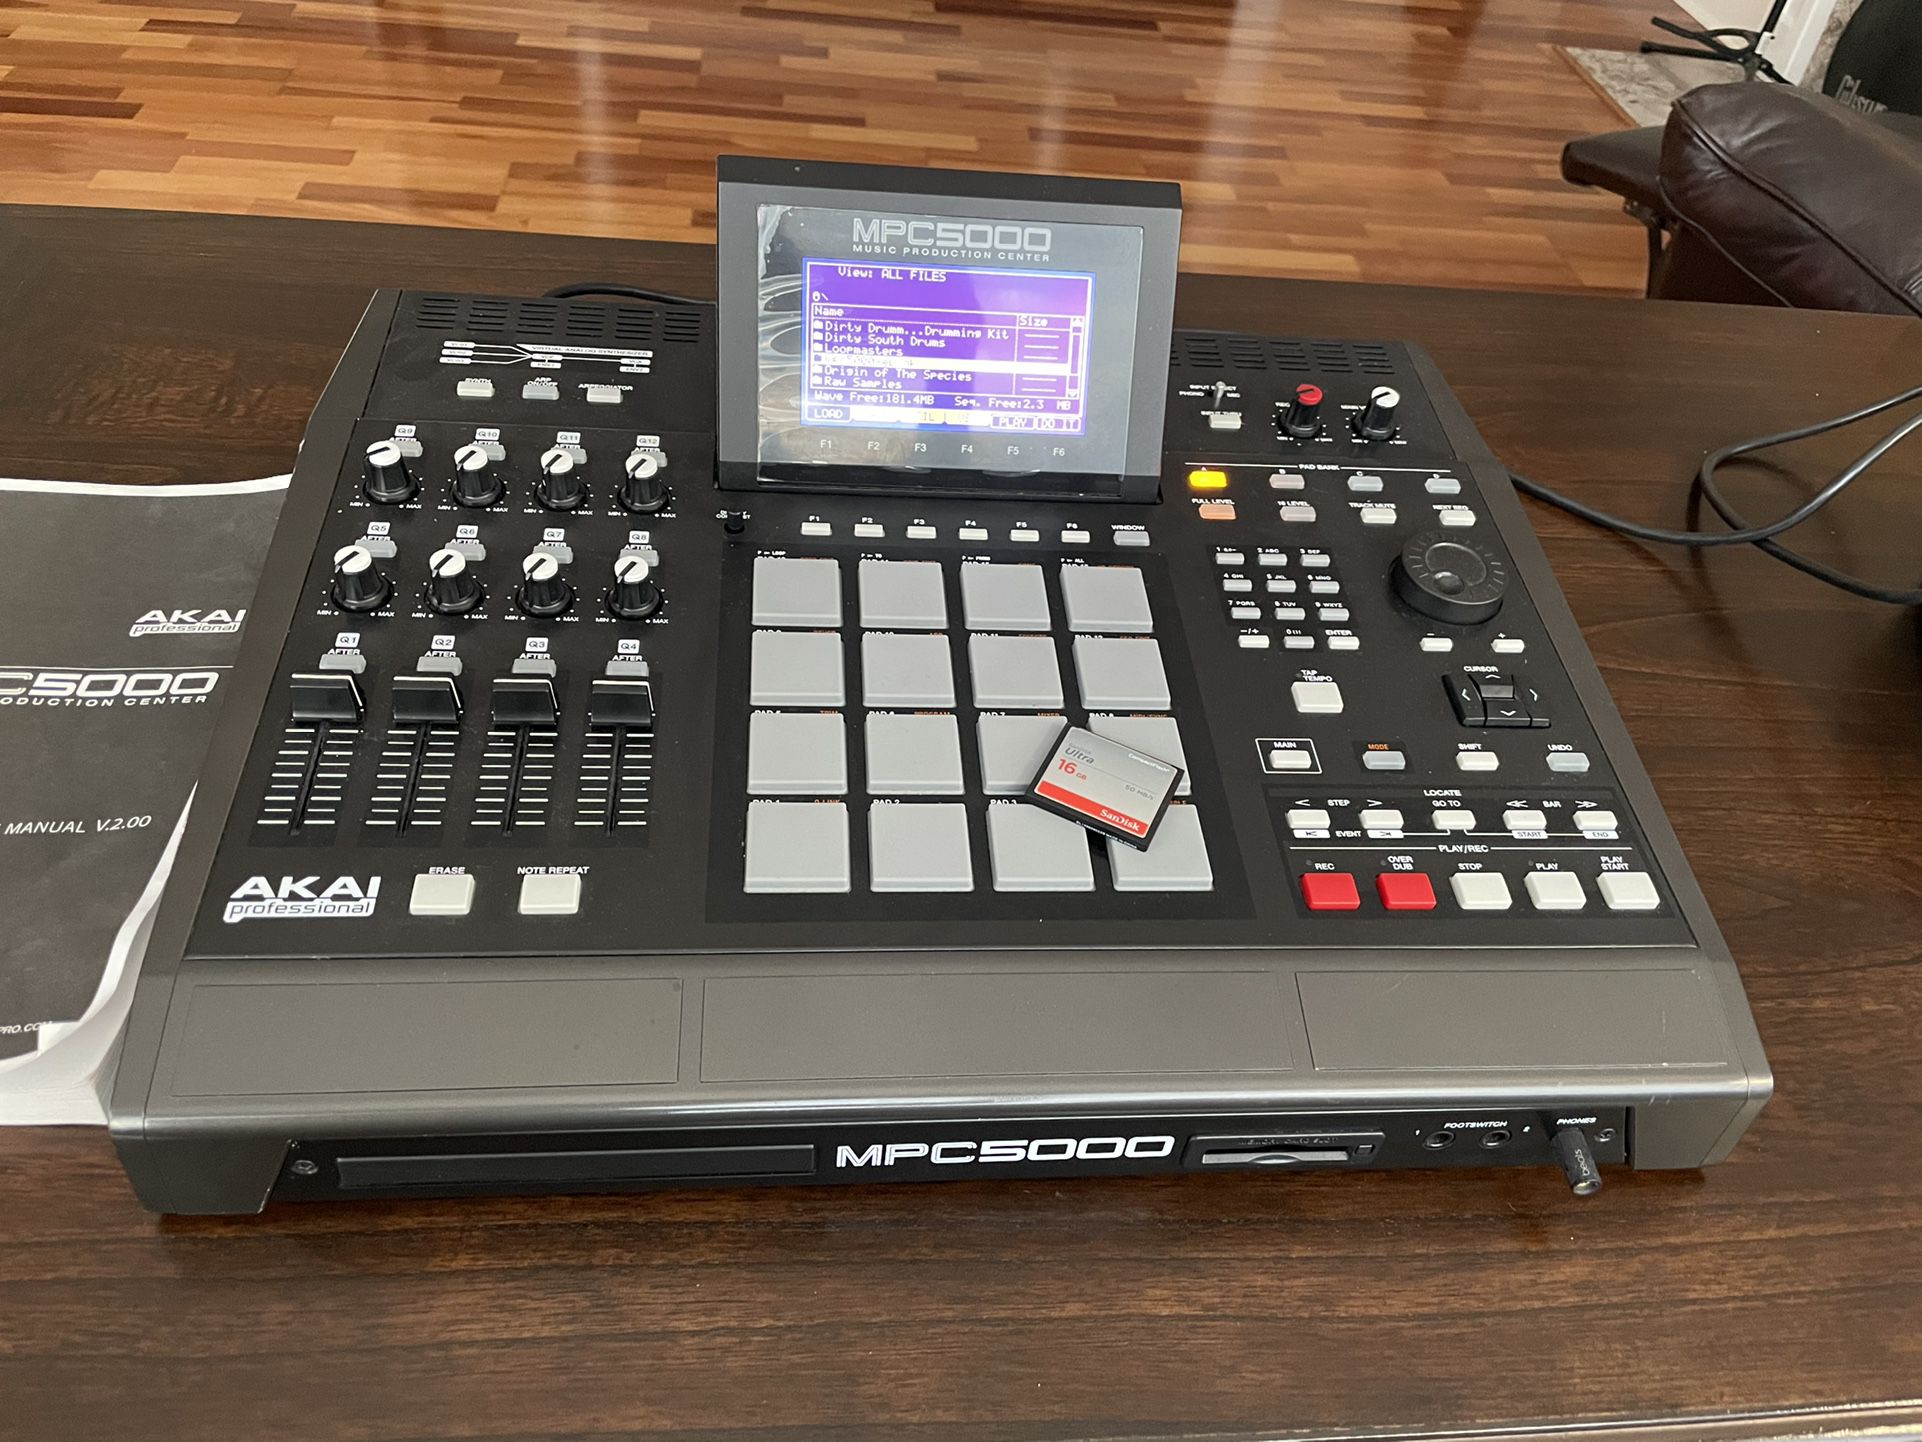 MPC5000 With CF16GB Card And 192MB Memory